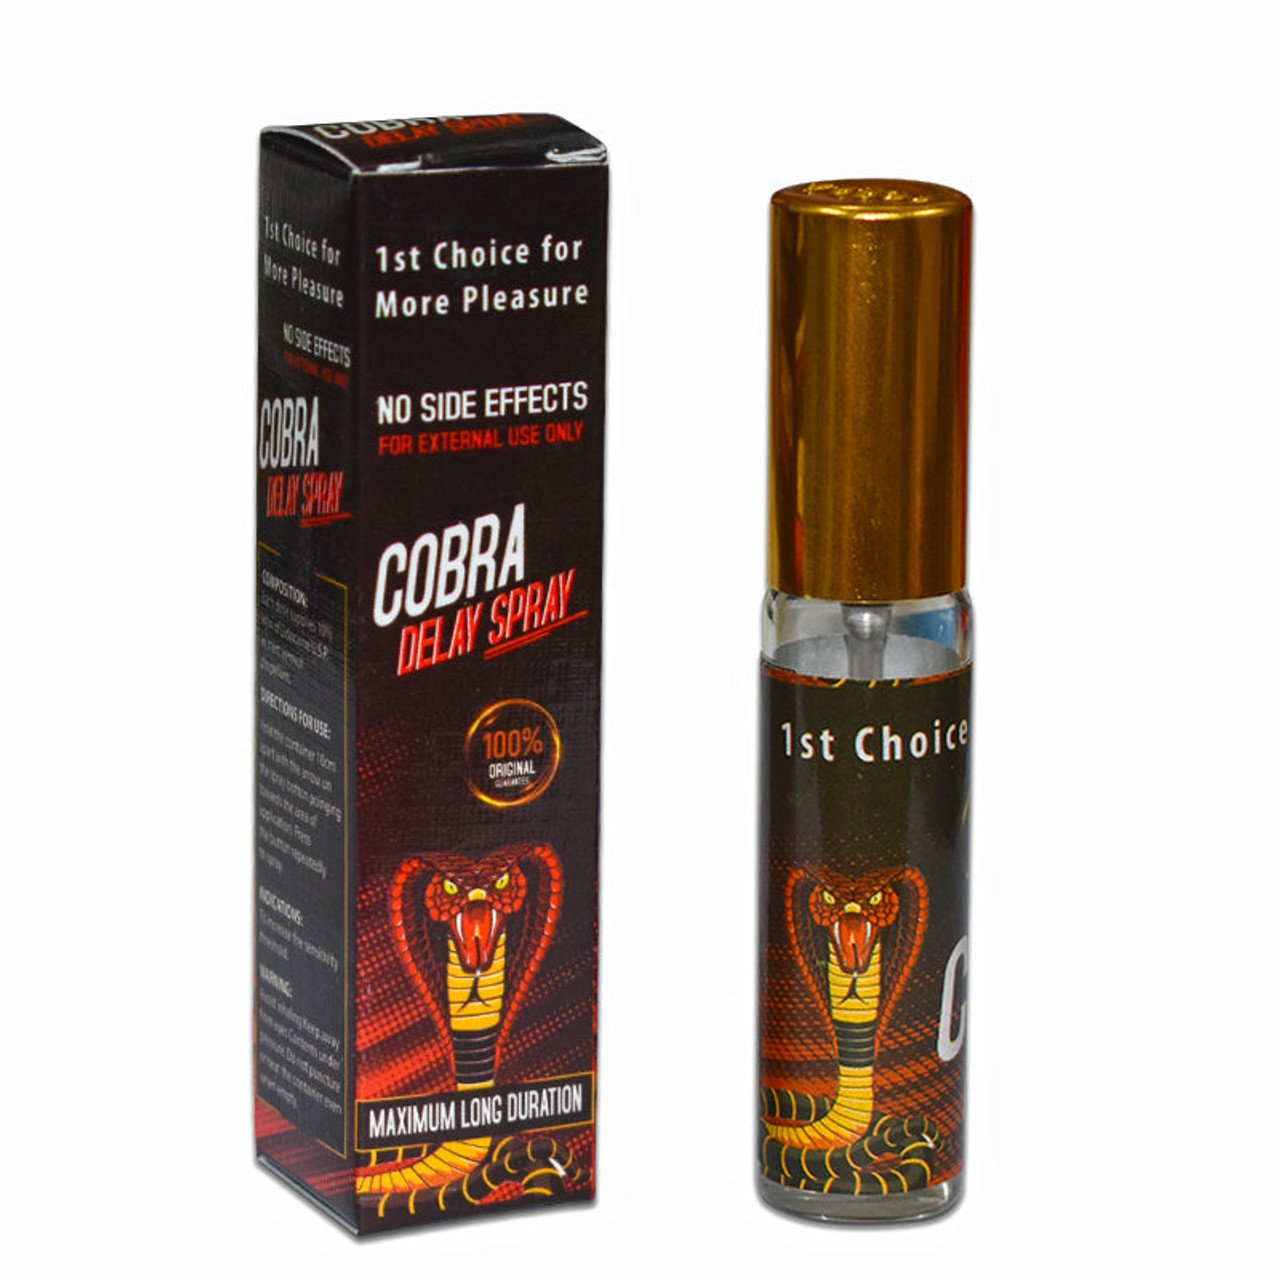 Buy Black Cobra Spray In Pakistan at Rs. 1150 from Likeshop.pk